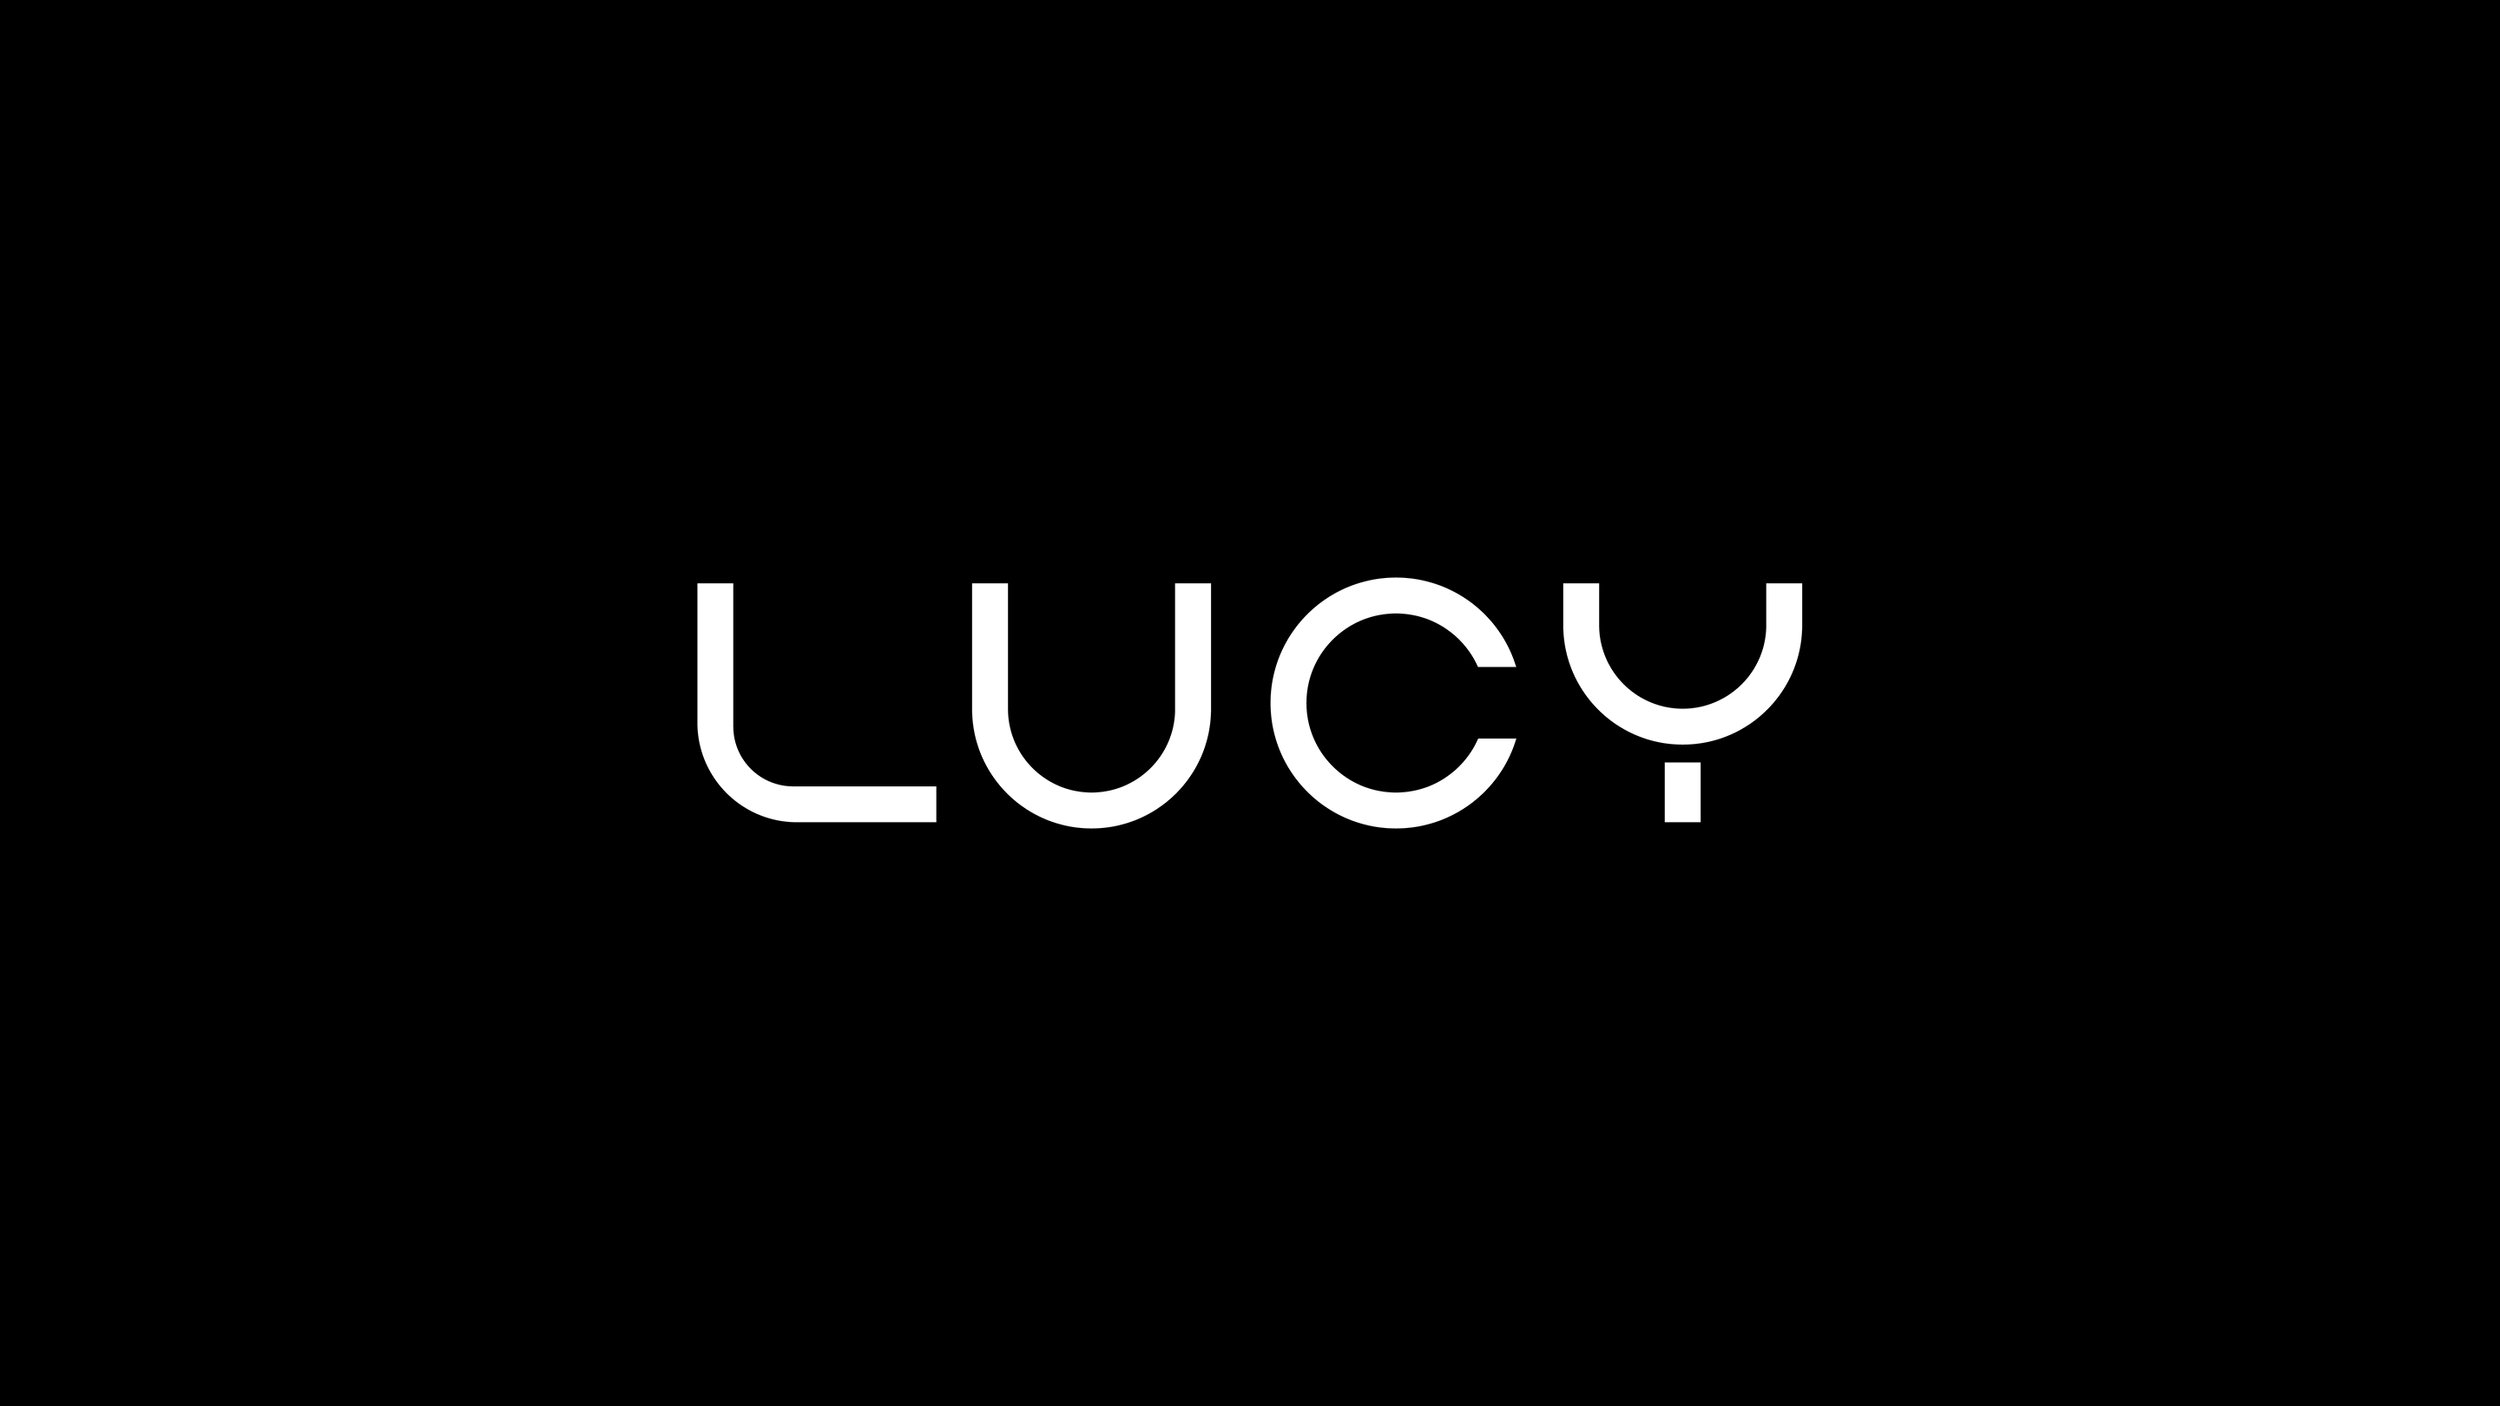   LUCY  | Identity Design | Highly Confidential | 2017 